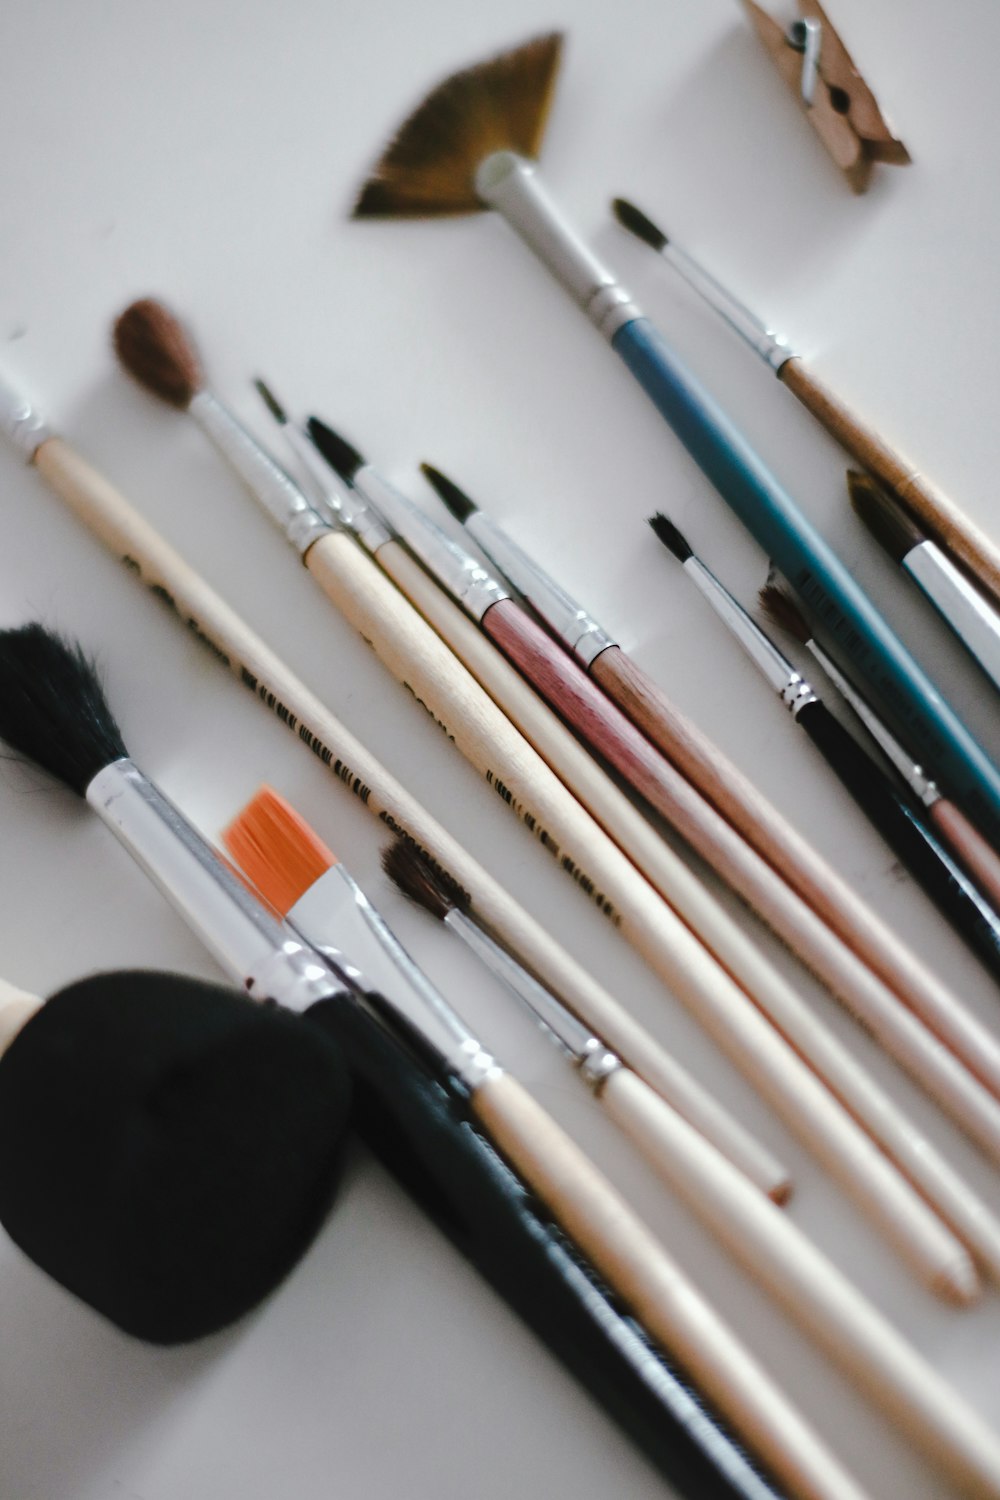 Paintbrushes Pictures  Download Free Images on Unsplash